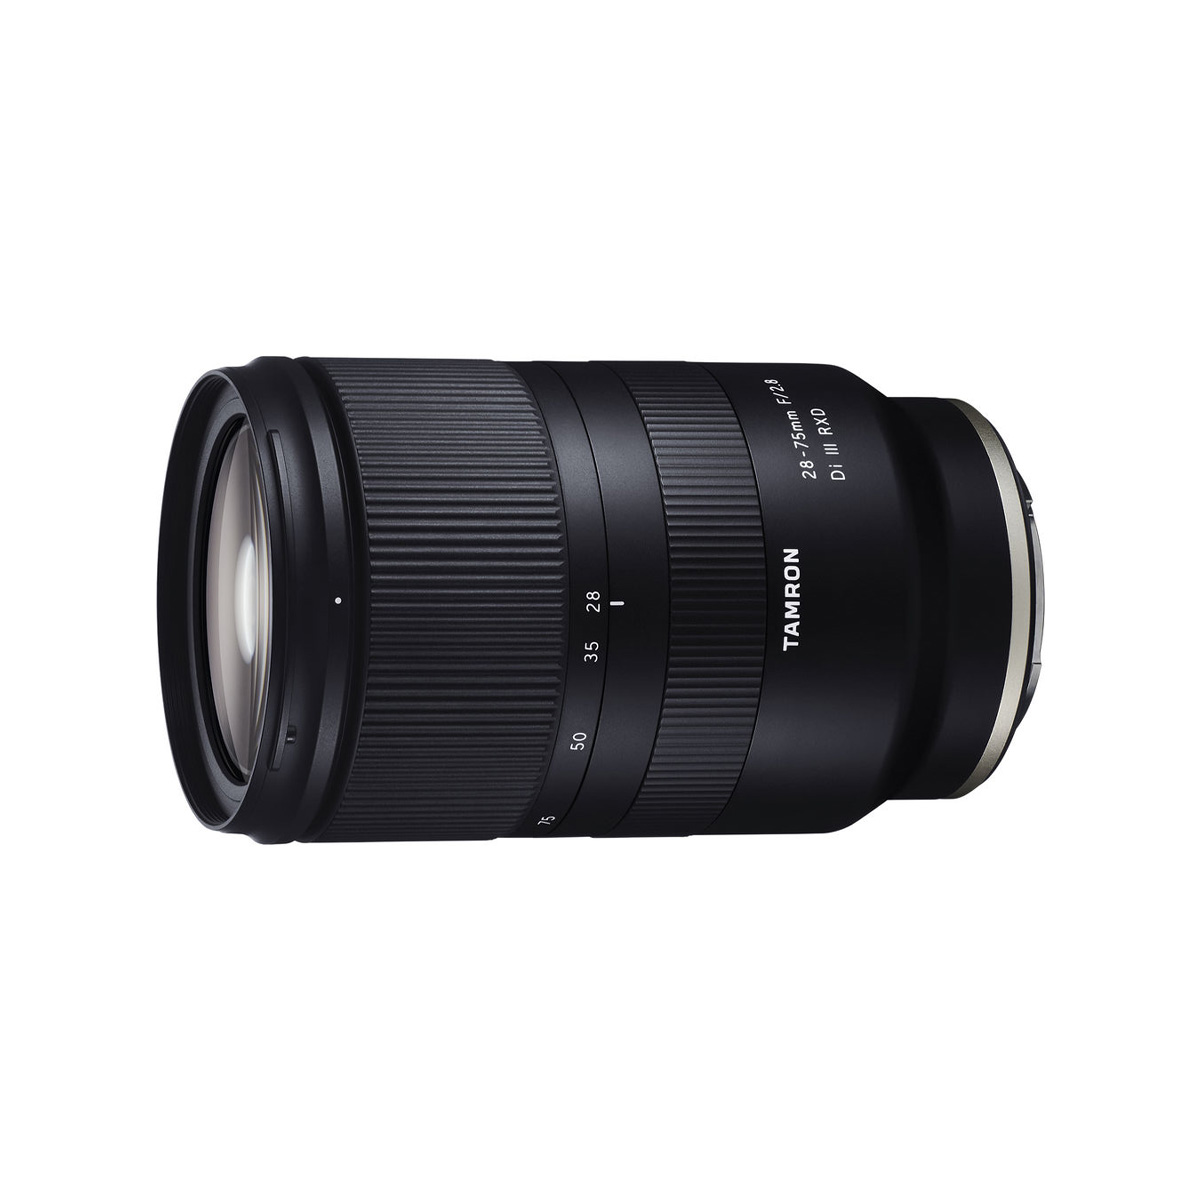 Tamron 28-75mm f/2.8 Di III RXD Lens for Sony E – The Camera Exchange, Inc.